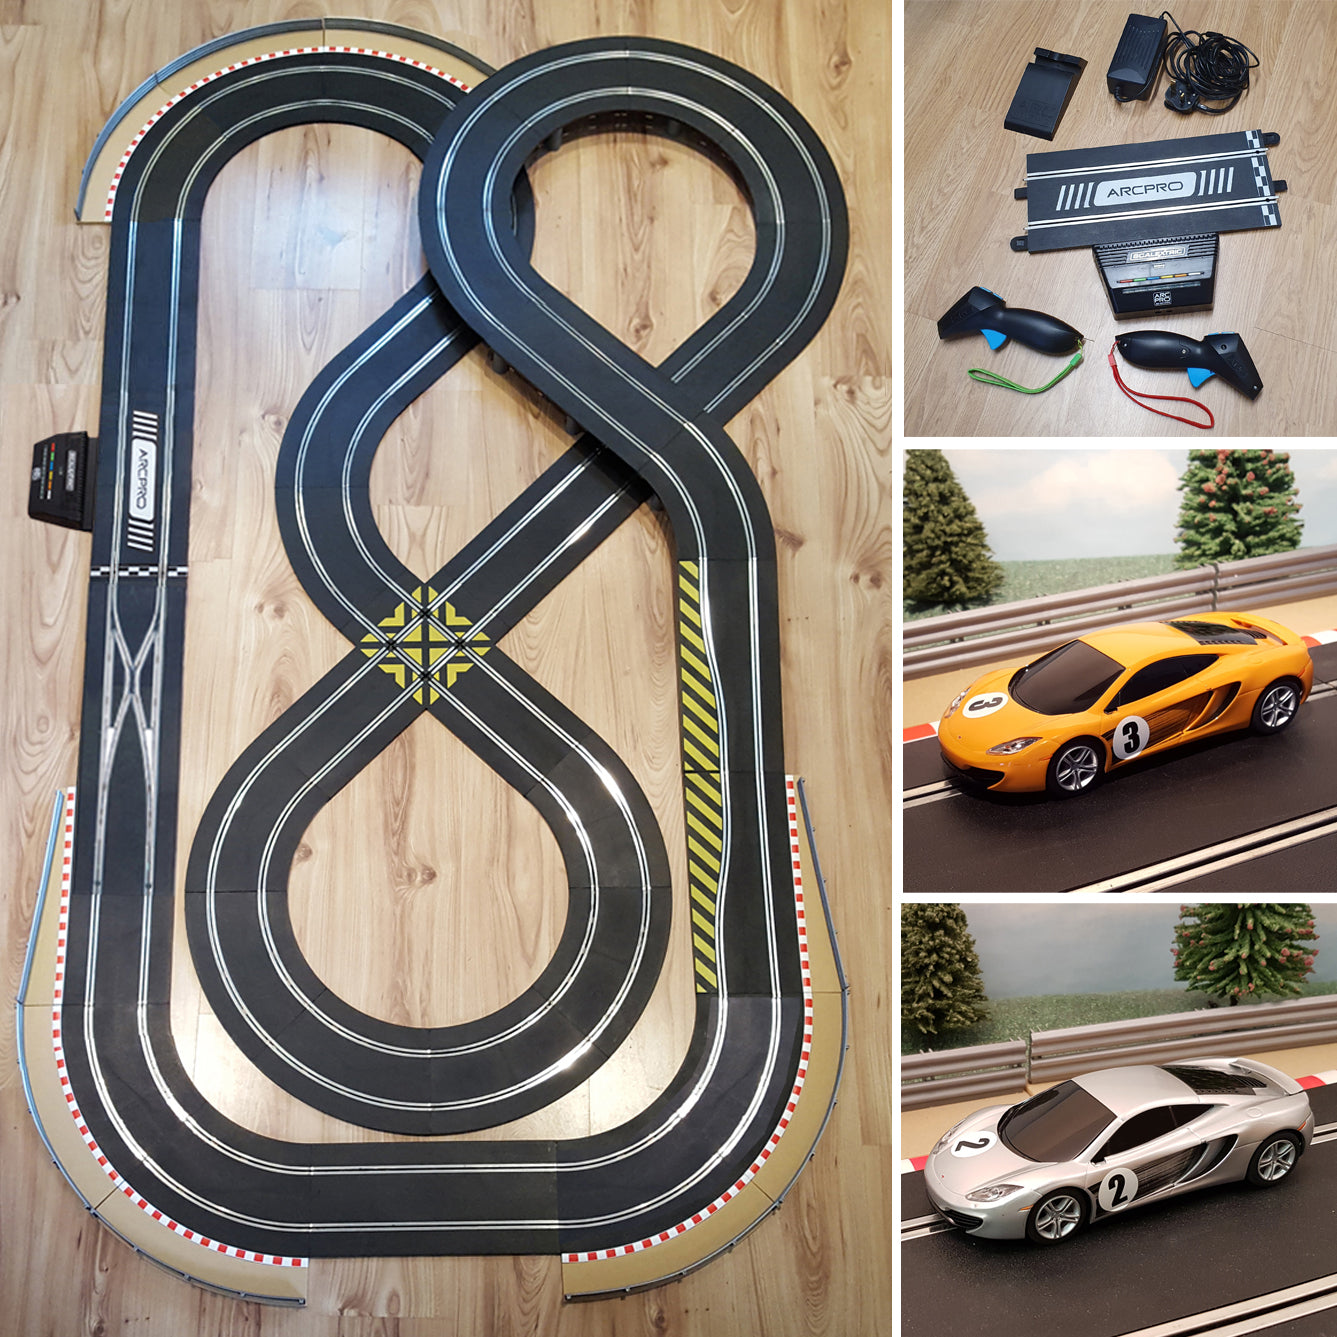 Scalextric 1:32 Figure-Of-Eight Layout Set ARC Pro With McLaren Cars